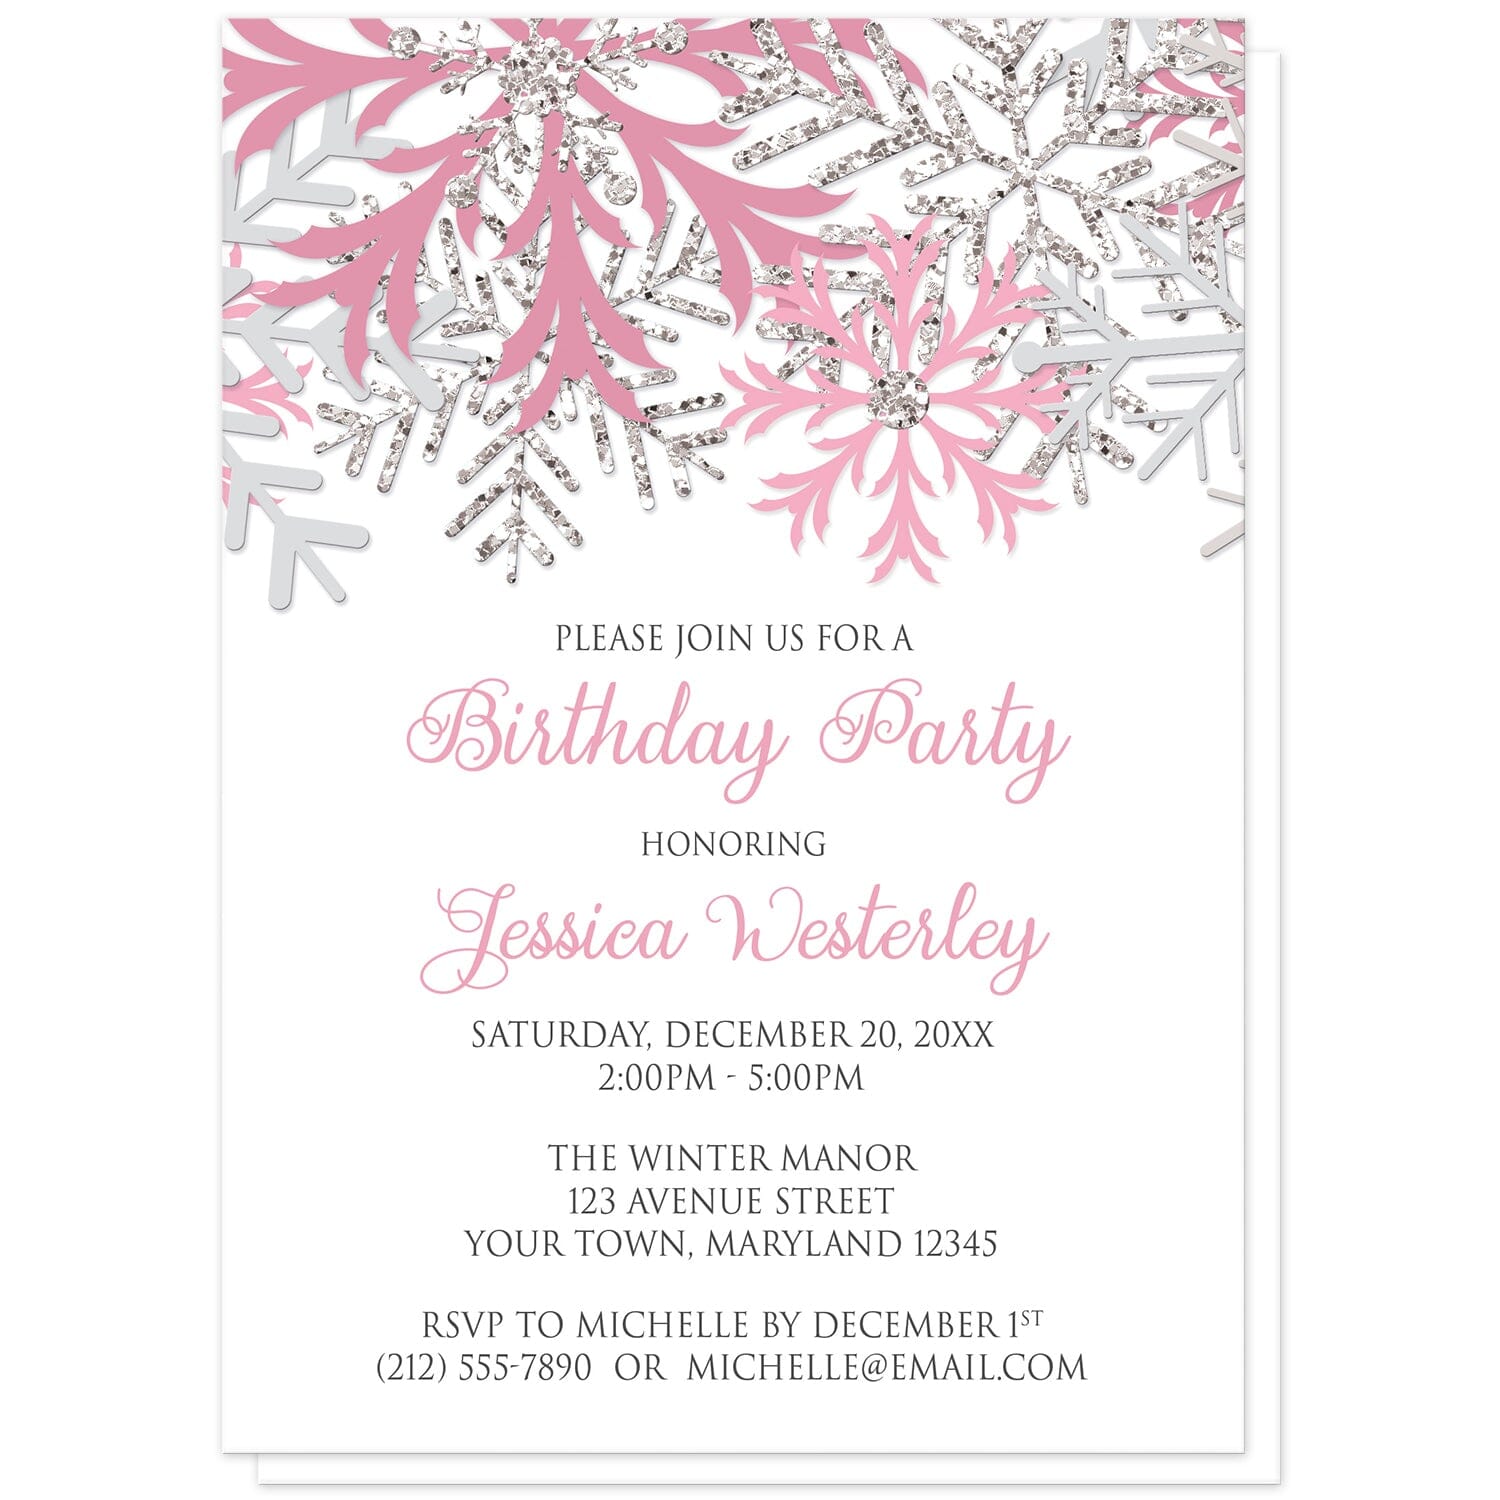 Winter Pink Silver Snowflake Birthday Party Invitations at Artistically Invited. Beautiful winter pink silver snowflake birthday party invitations designed with pink, light pink, silver-colored glitter-illustrated, and light gray snowflakes along the top over a white background. Your personalized birthday celebration details are custom printed in pink and gray below the pretty snowflakes.